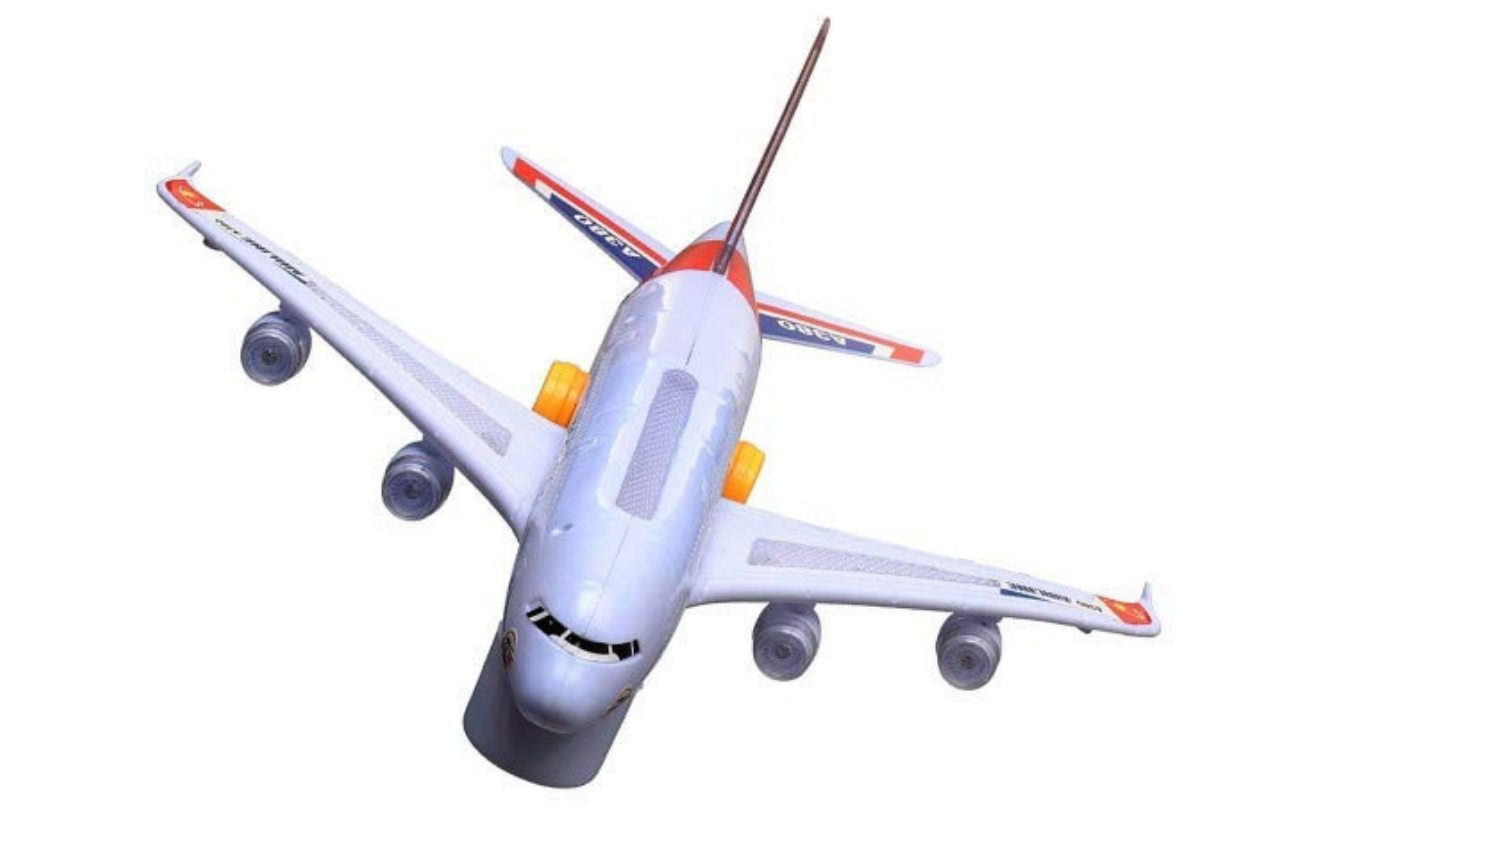 Airbus A380 Airplane Model Toy3